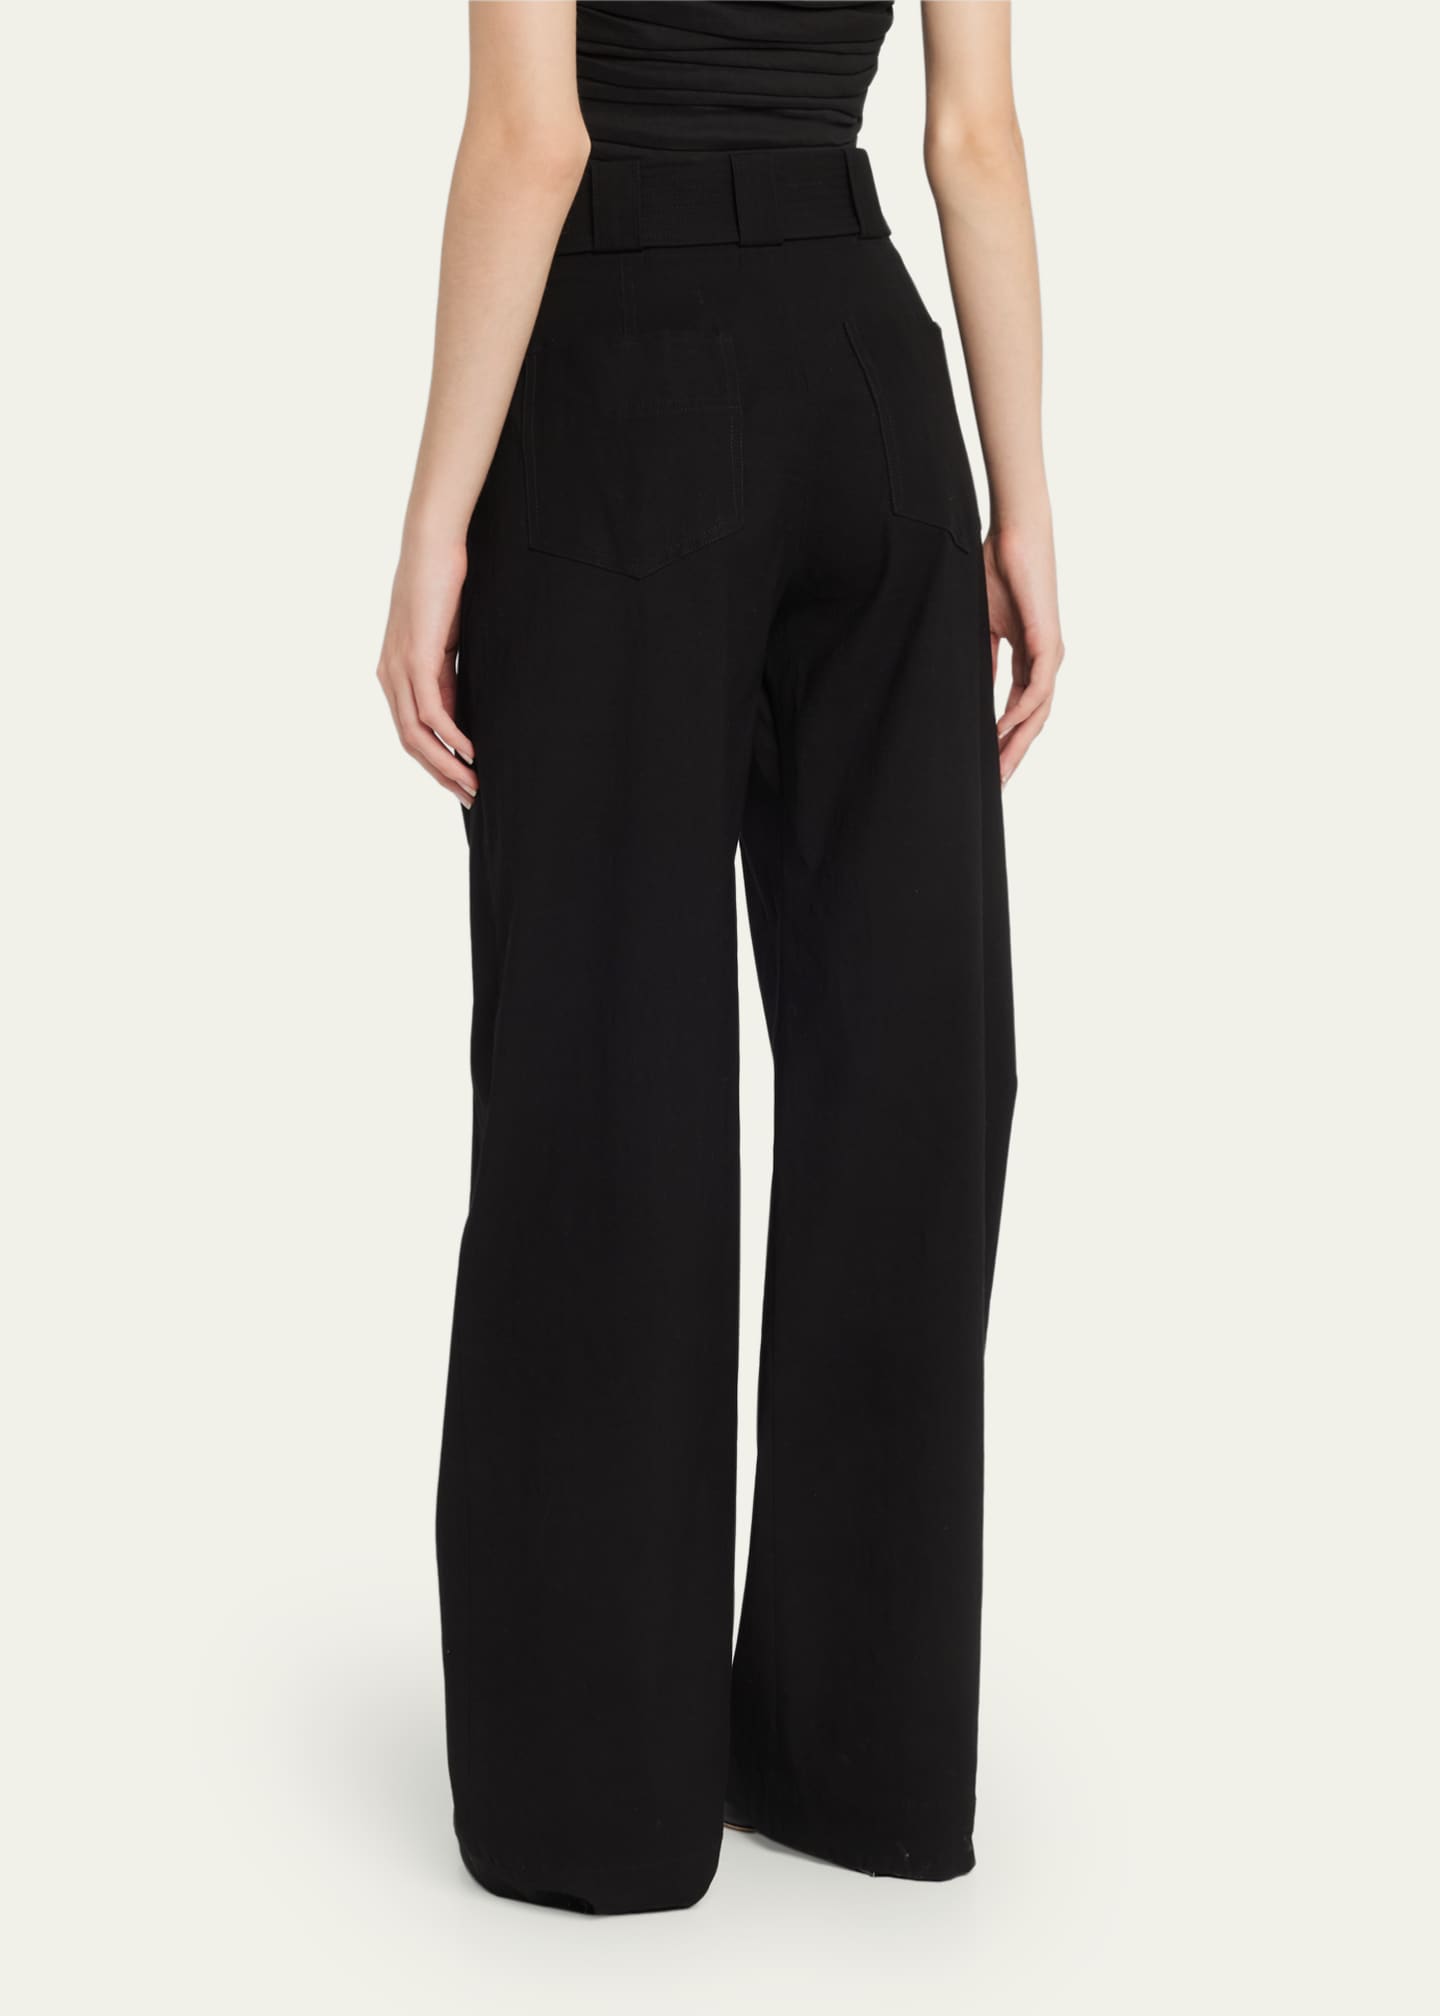 A.L.C. Darby Belted Wide-Leg Pants - Bergdorf Goodman